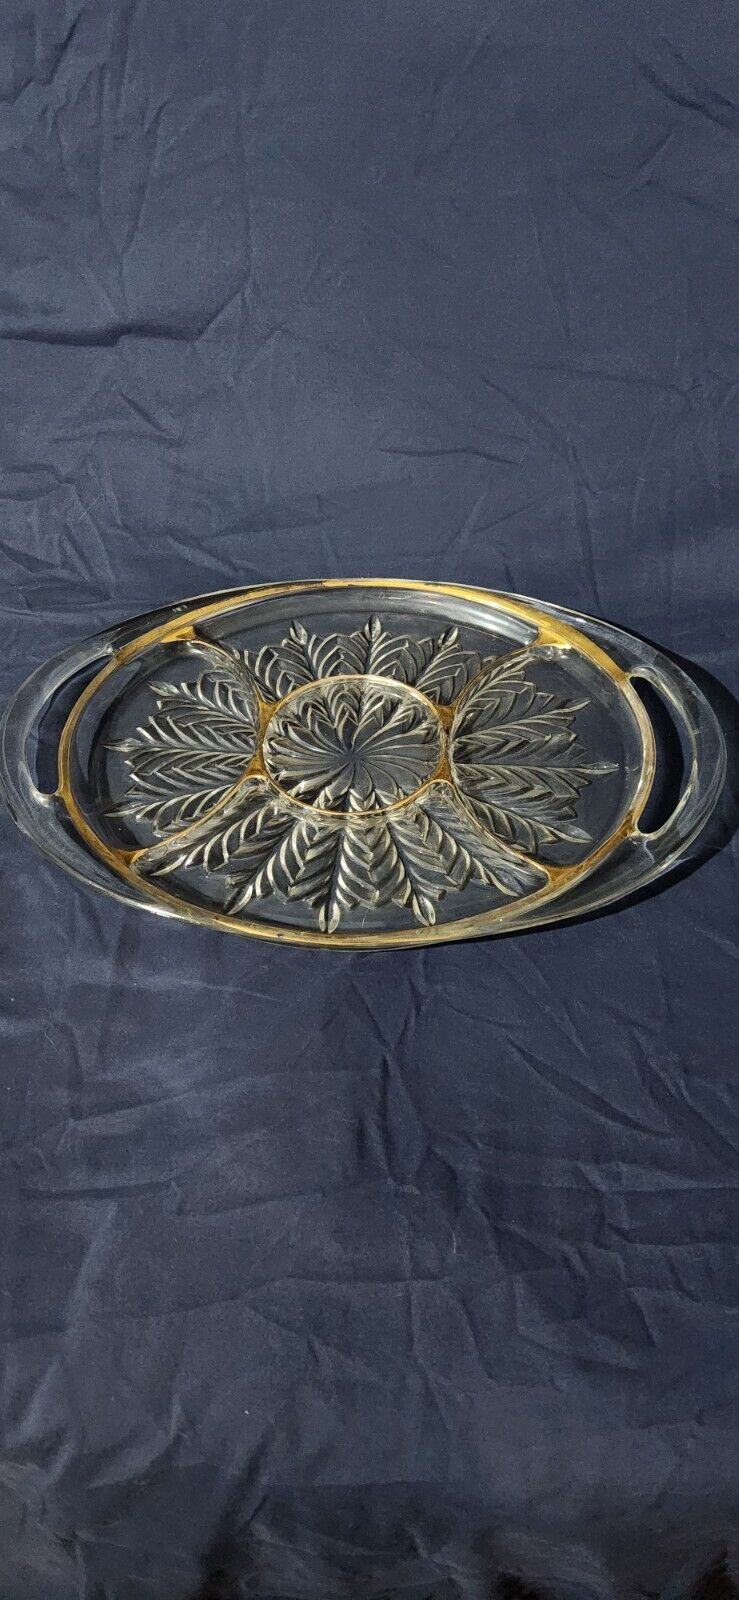 Jeanette Feather Gold Trim 5 Section Handled Relish Tray Clear Glass Vintage